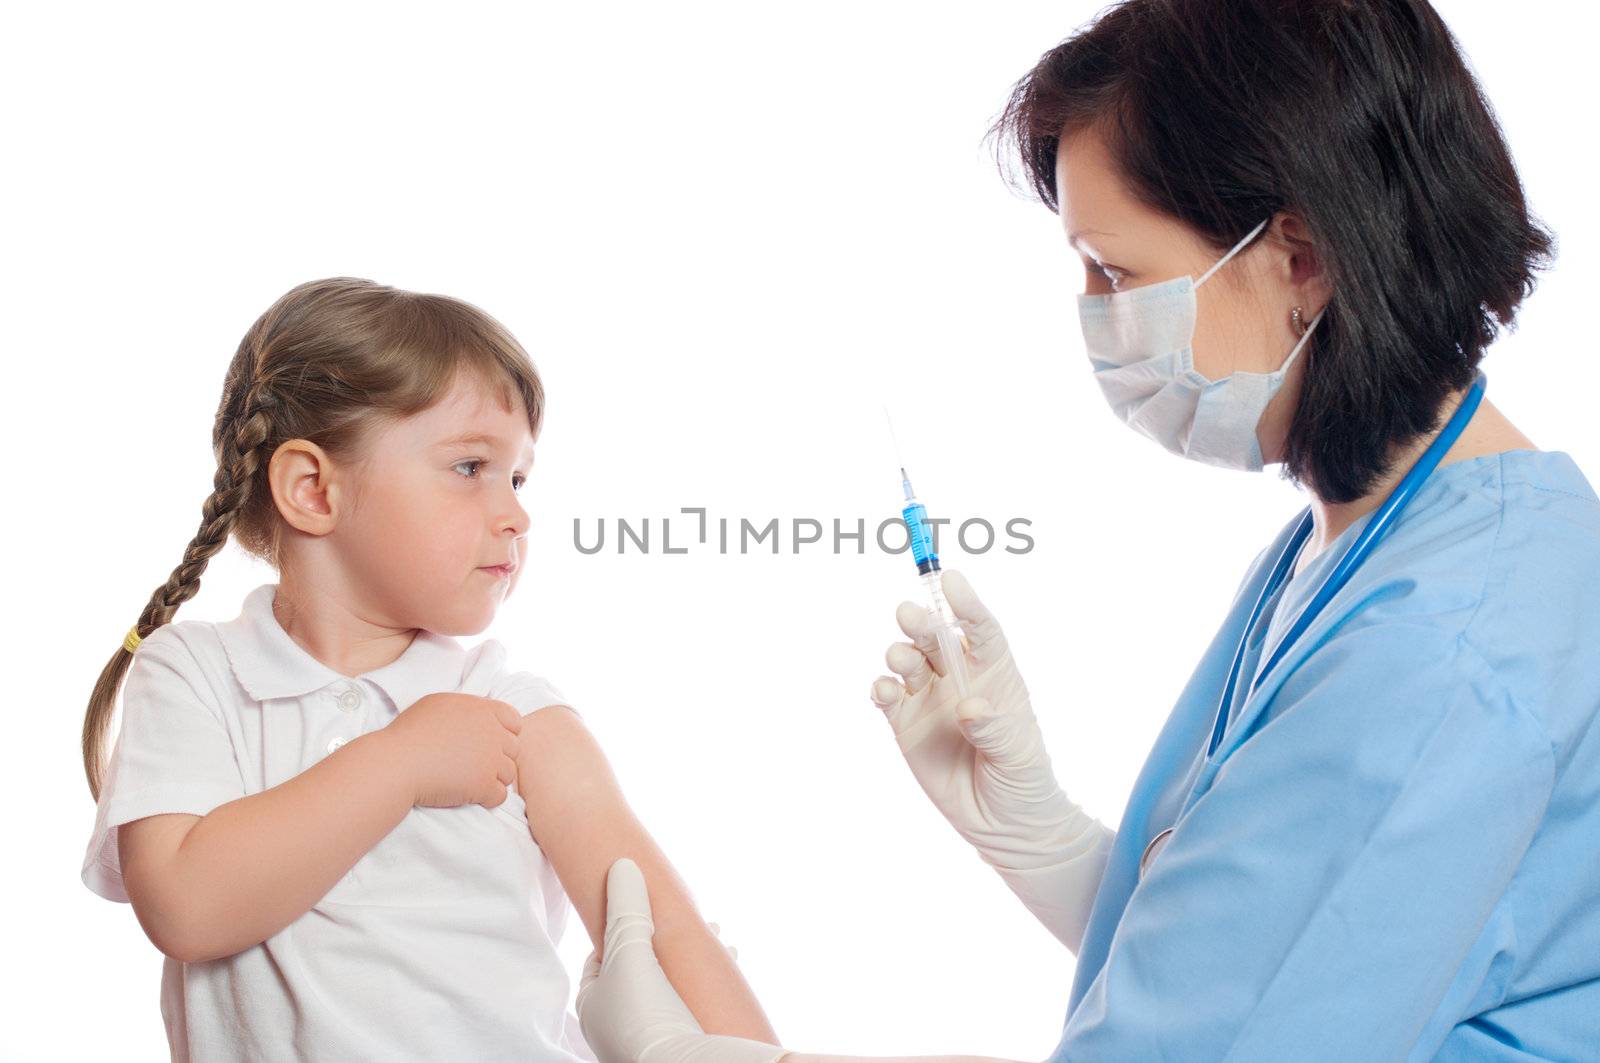 doctor does an inoculation to little girl